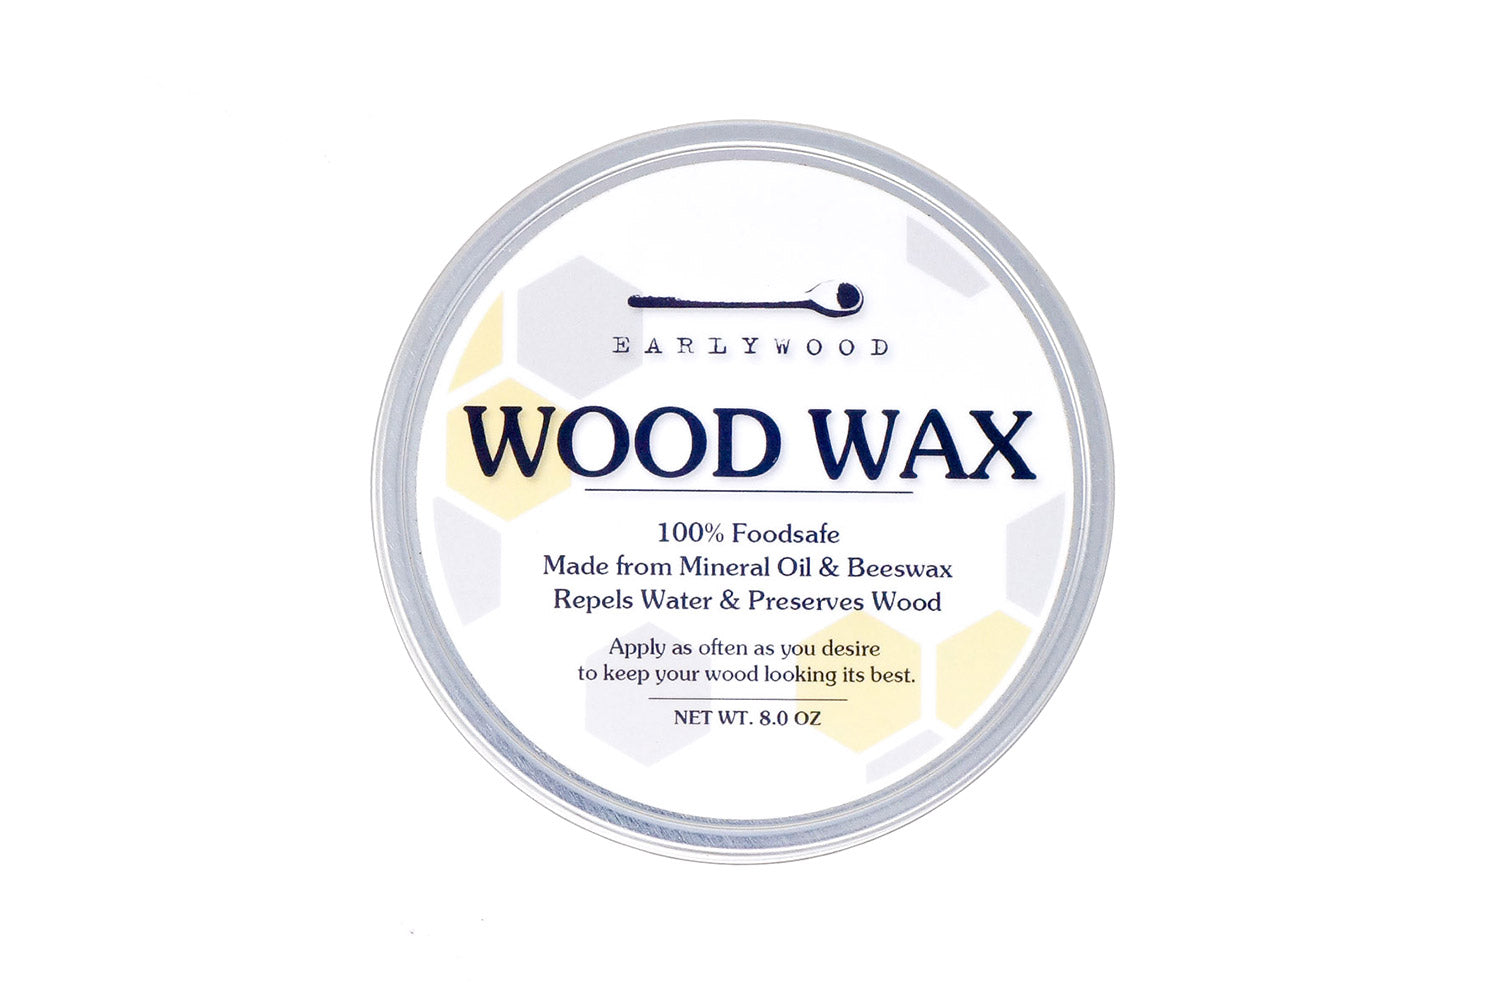 Best Beeswax For Your Cutting Board